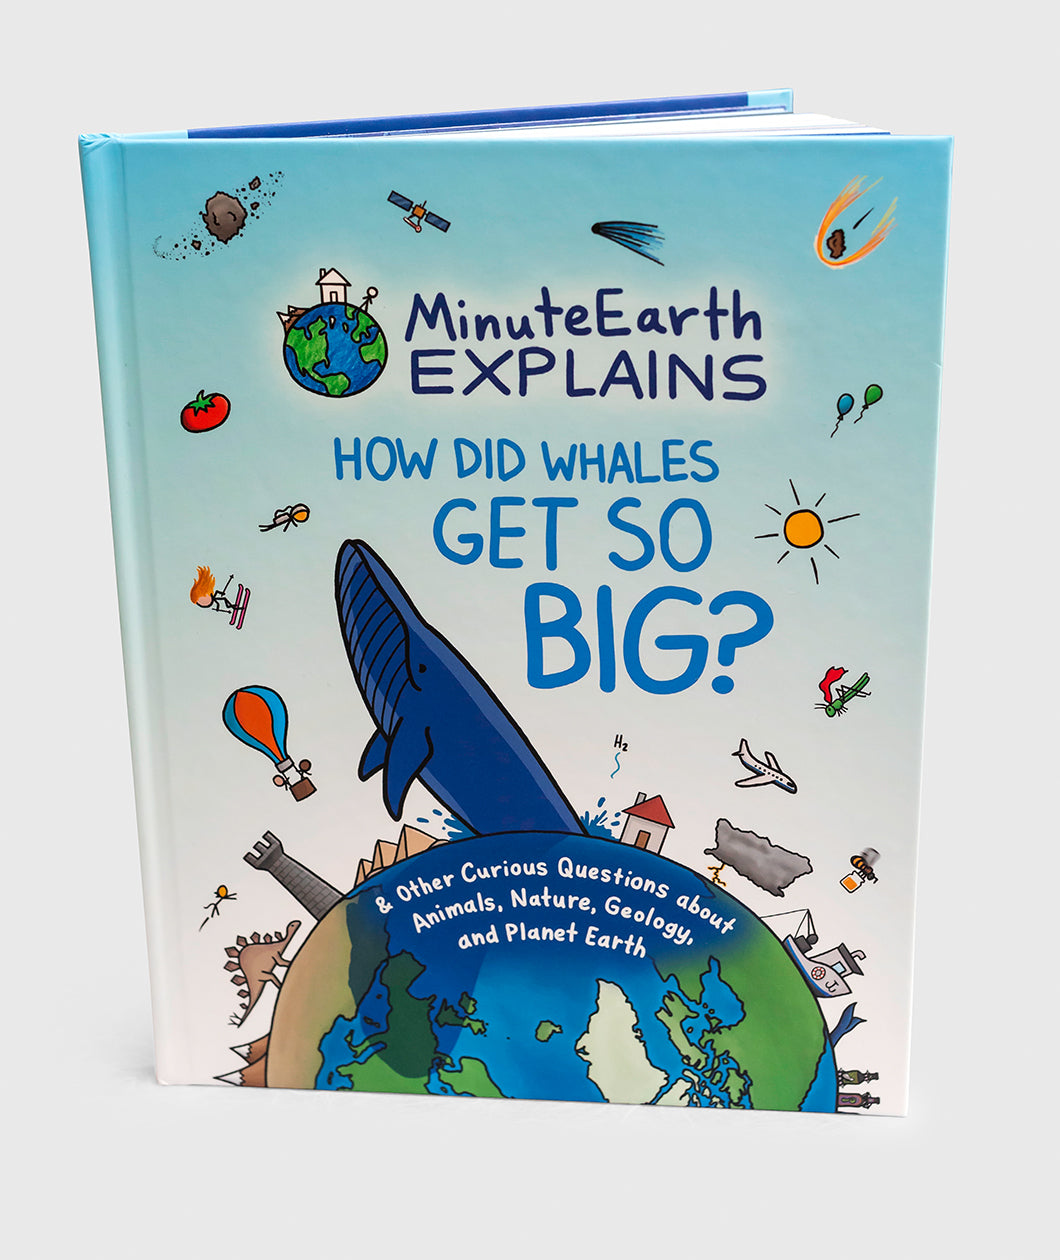 A book titled "Minute Earth Explains; How did whales get so big?" with an illustration of earth with a large whale coming out of the top and other symbols like a sun, airplane, a house, a cast, a dinosaur, etc.